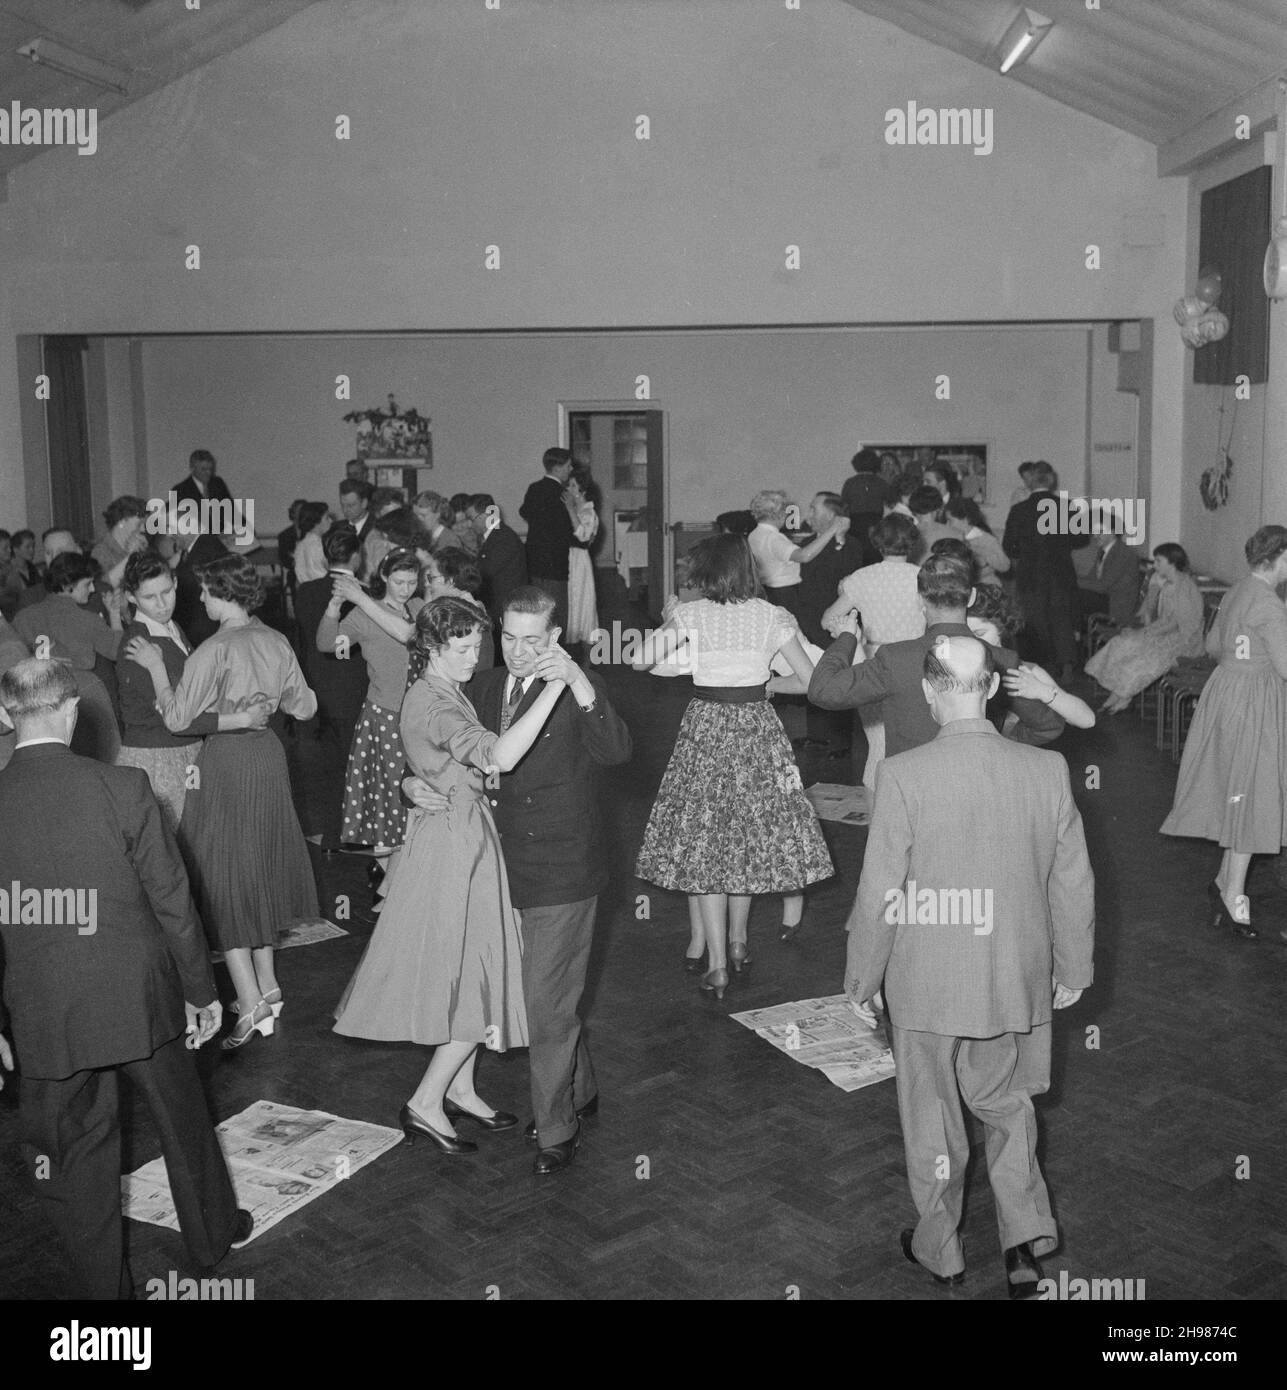 Goodwyn Hall, Mill Hill, Barnet, London, 06/01/1958. People dancing at the Sports Club's annual New Year party. Laing's Sports Club's New Year party was held for club members and their families at Goodwyn Hall, Mill Hill. Stock Photo